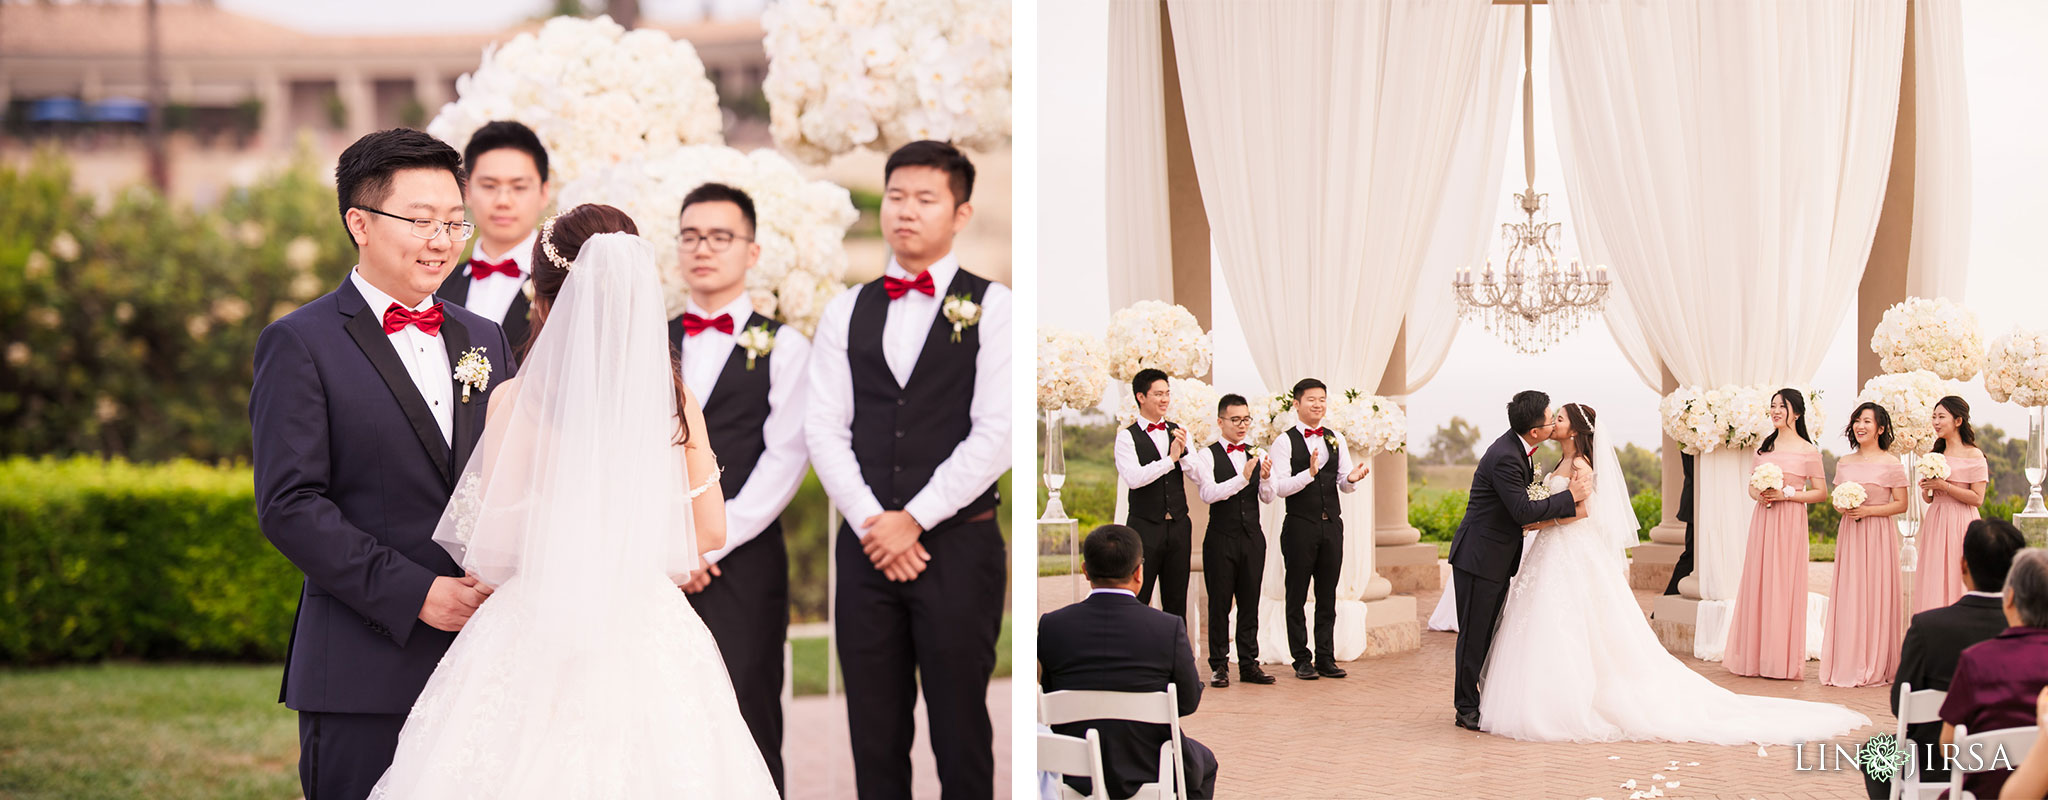 31 pelican hill orange county chinese wedding photography